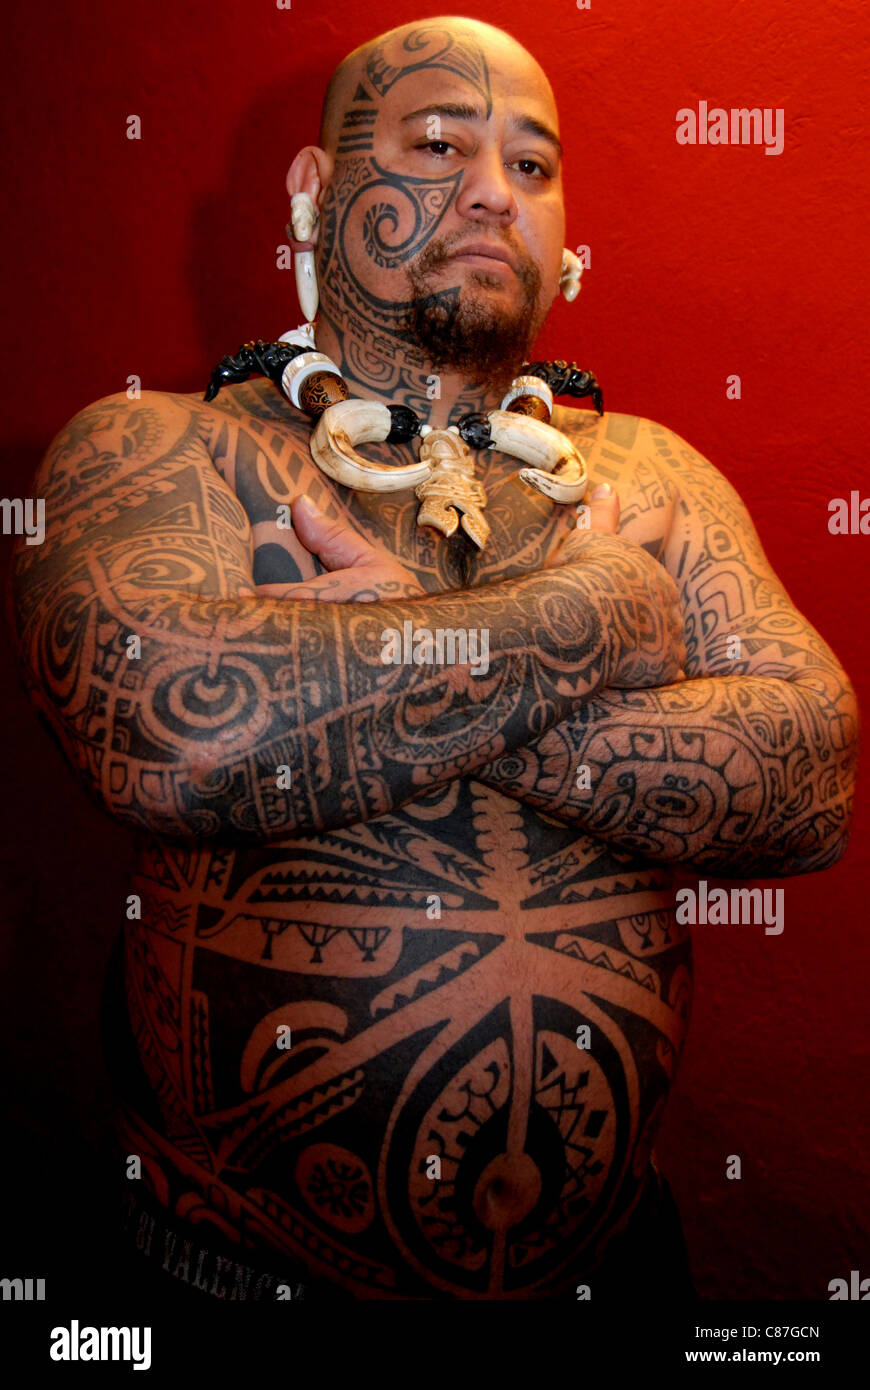 A Maori tattoo artist at the Tattoo Convention, Dresden, Germany Stock Photo